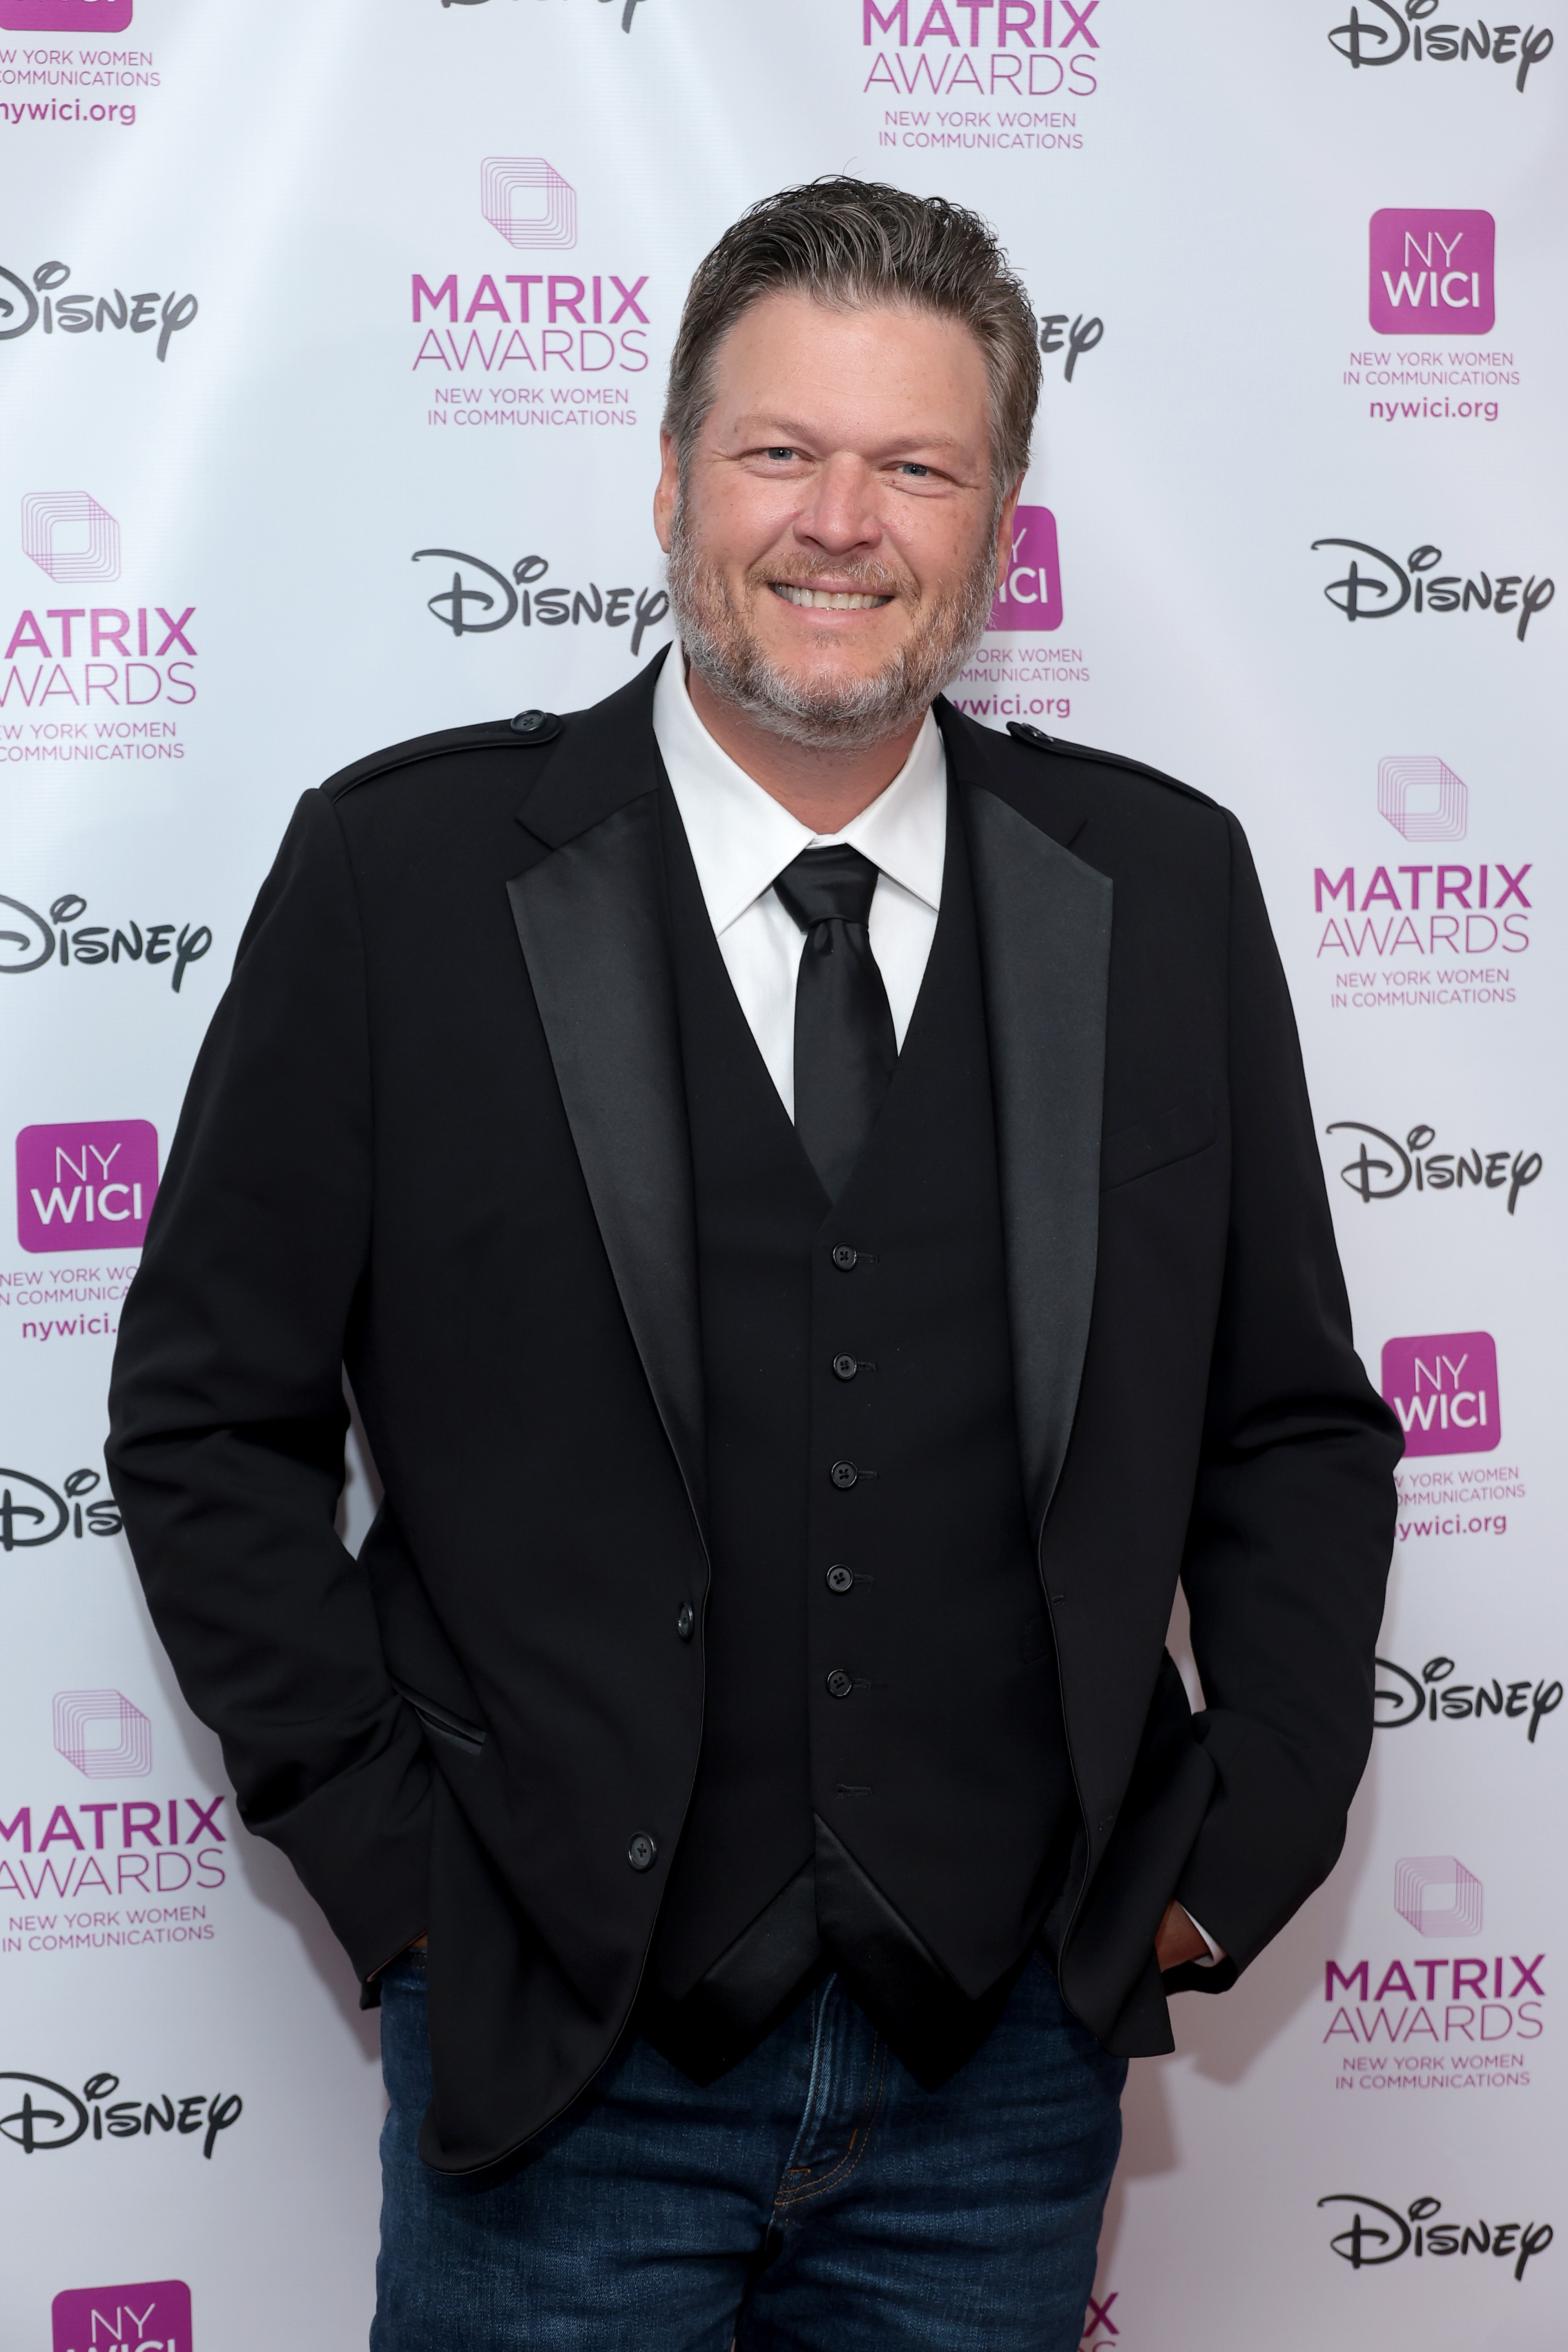 Blake Shelton at the 2022 Matrix Awards in New York City on October 26, 2022 | Source: Getty Images